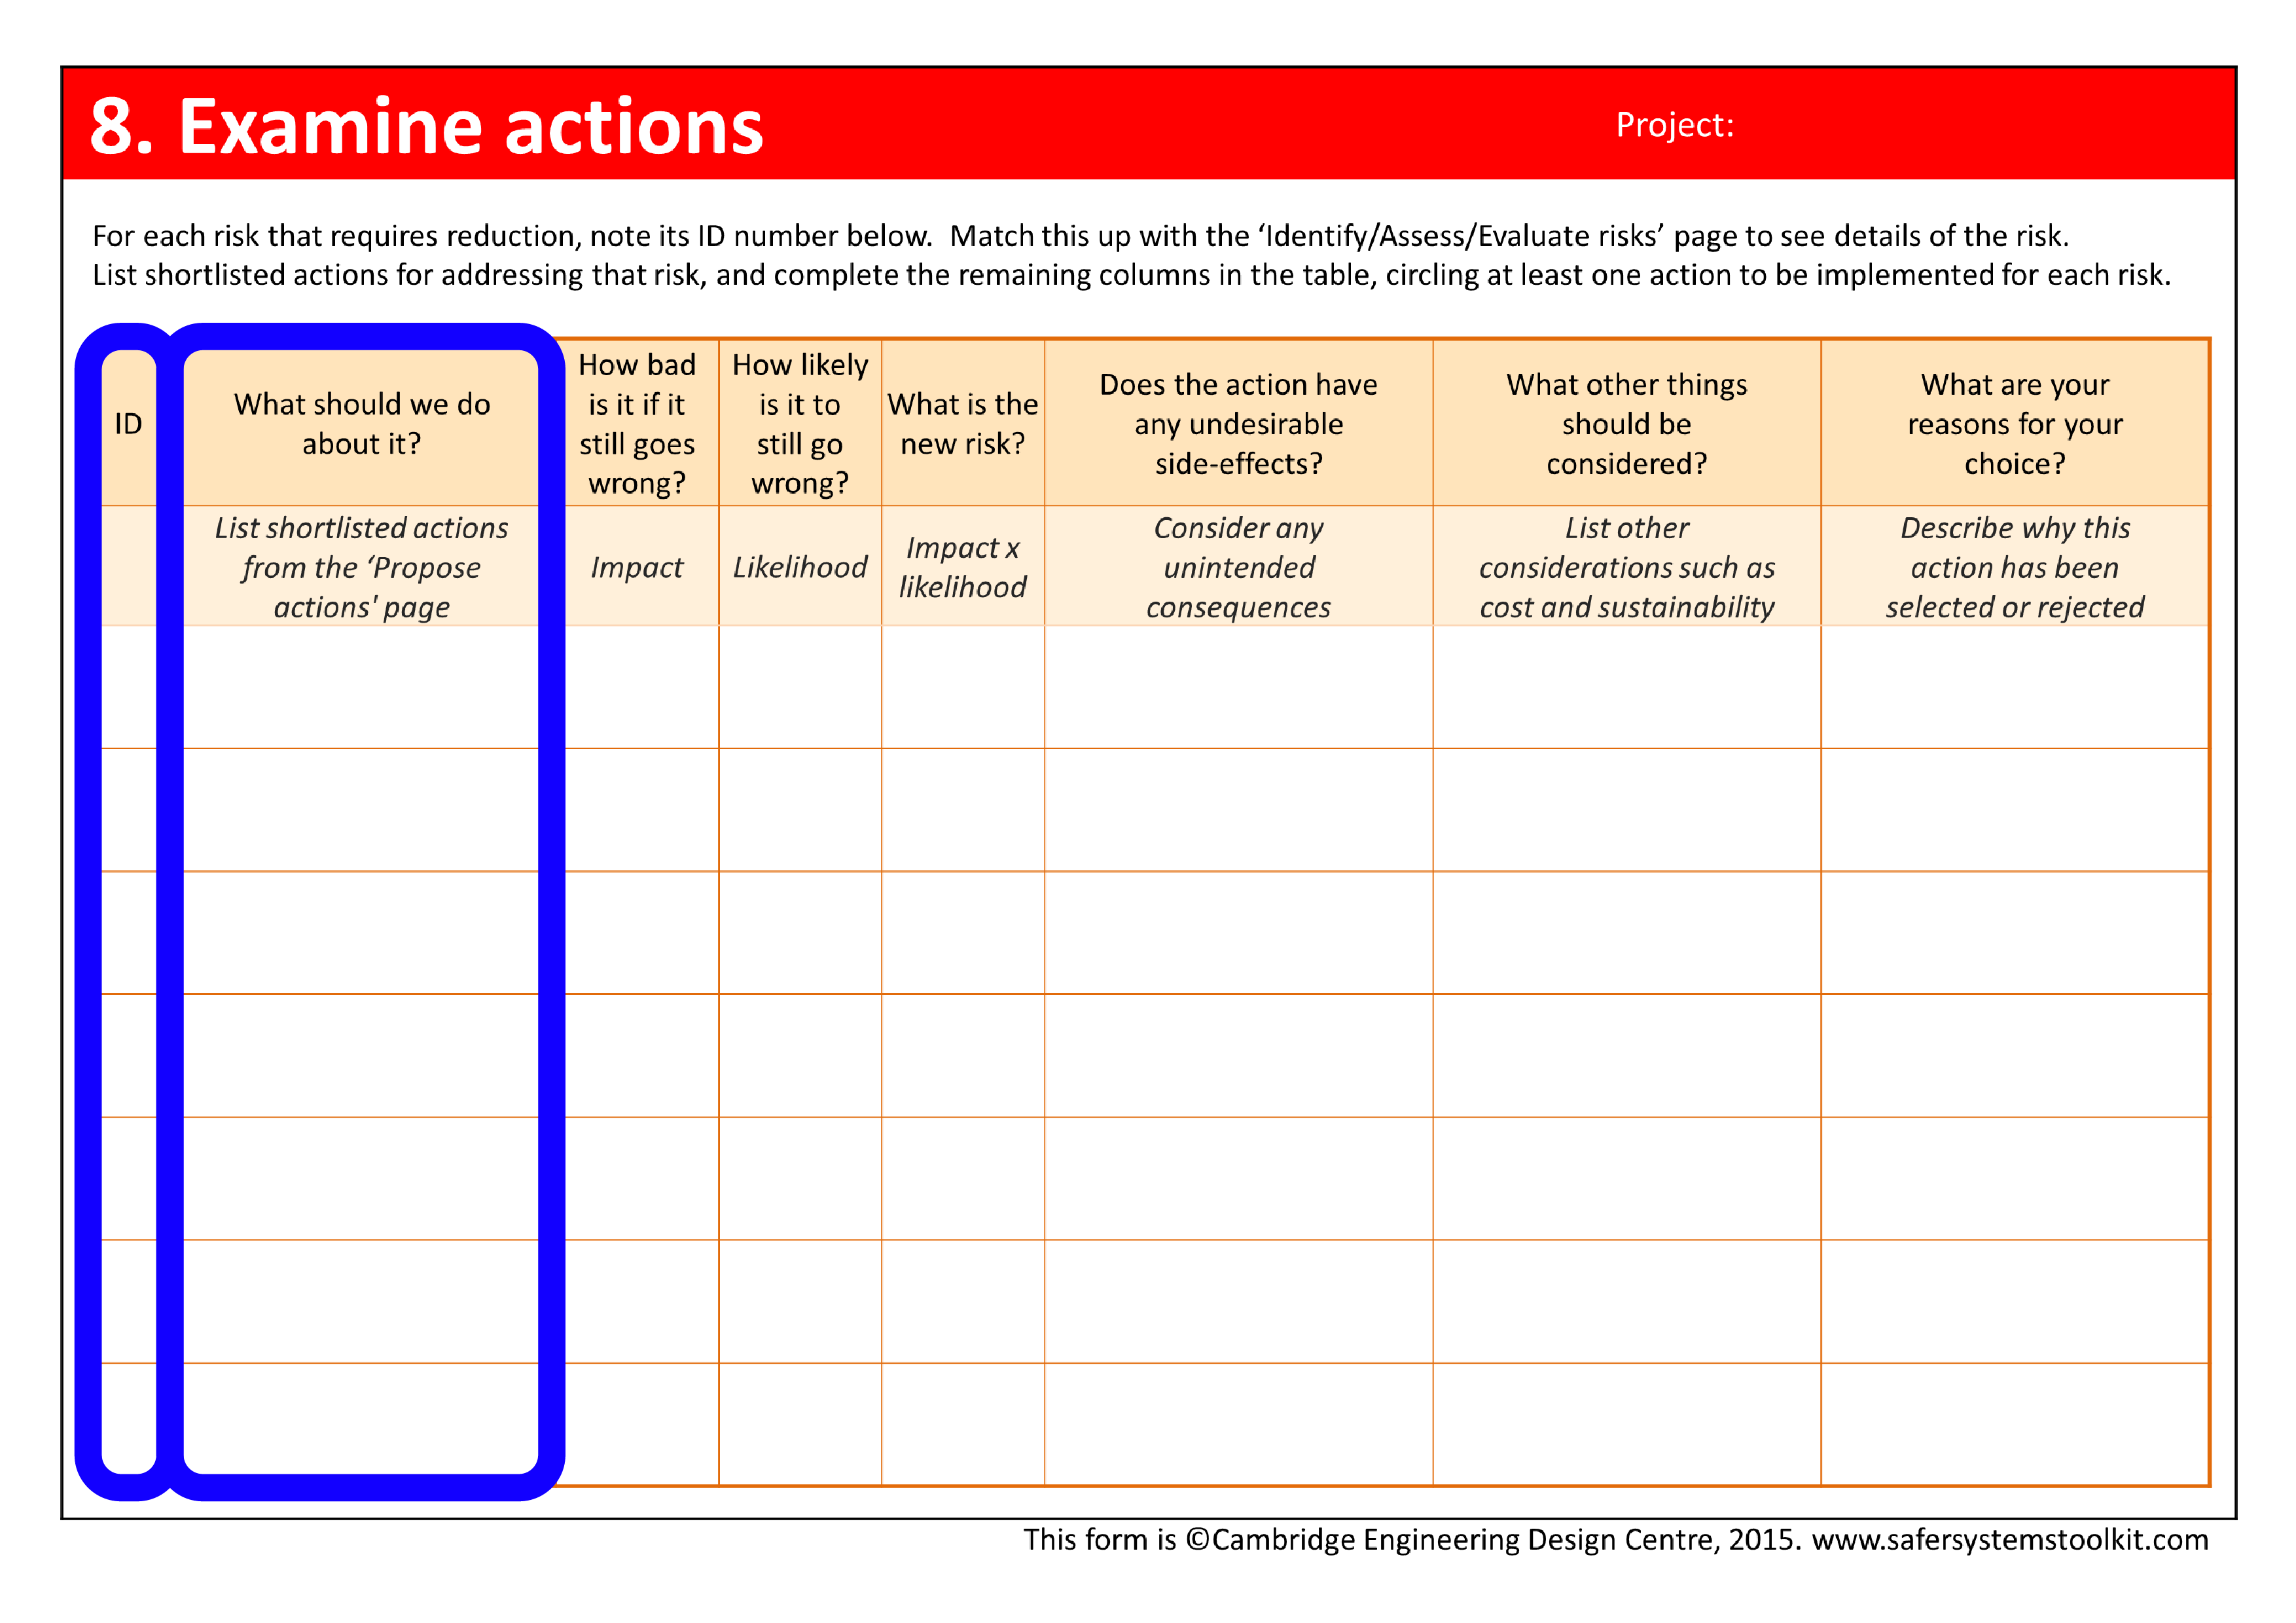 Screenshot of Examine actions page from the print version of the assessment form